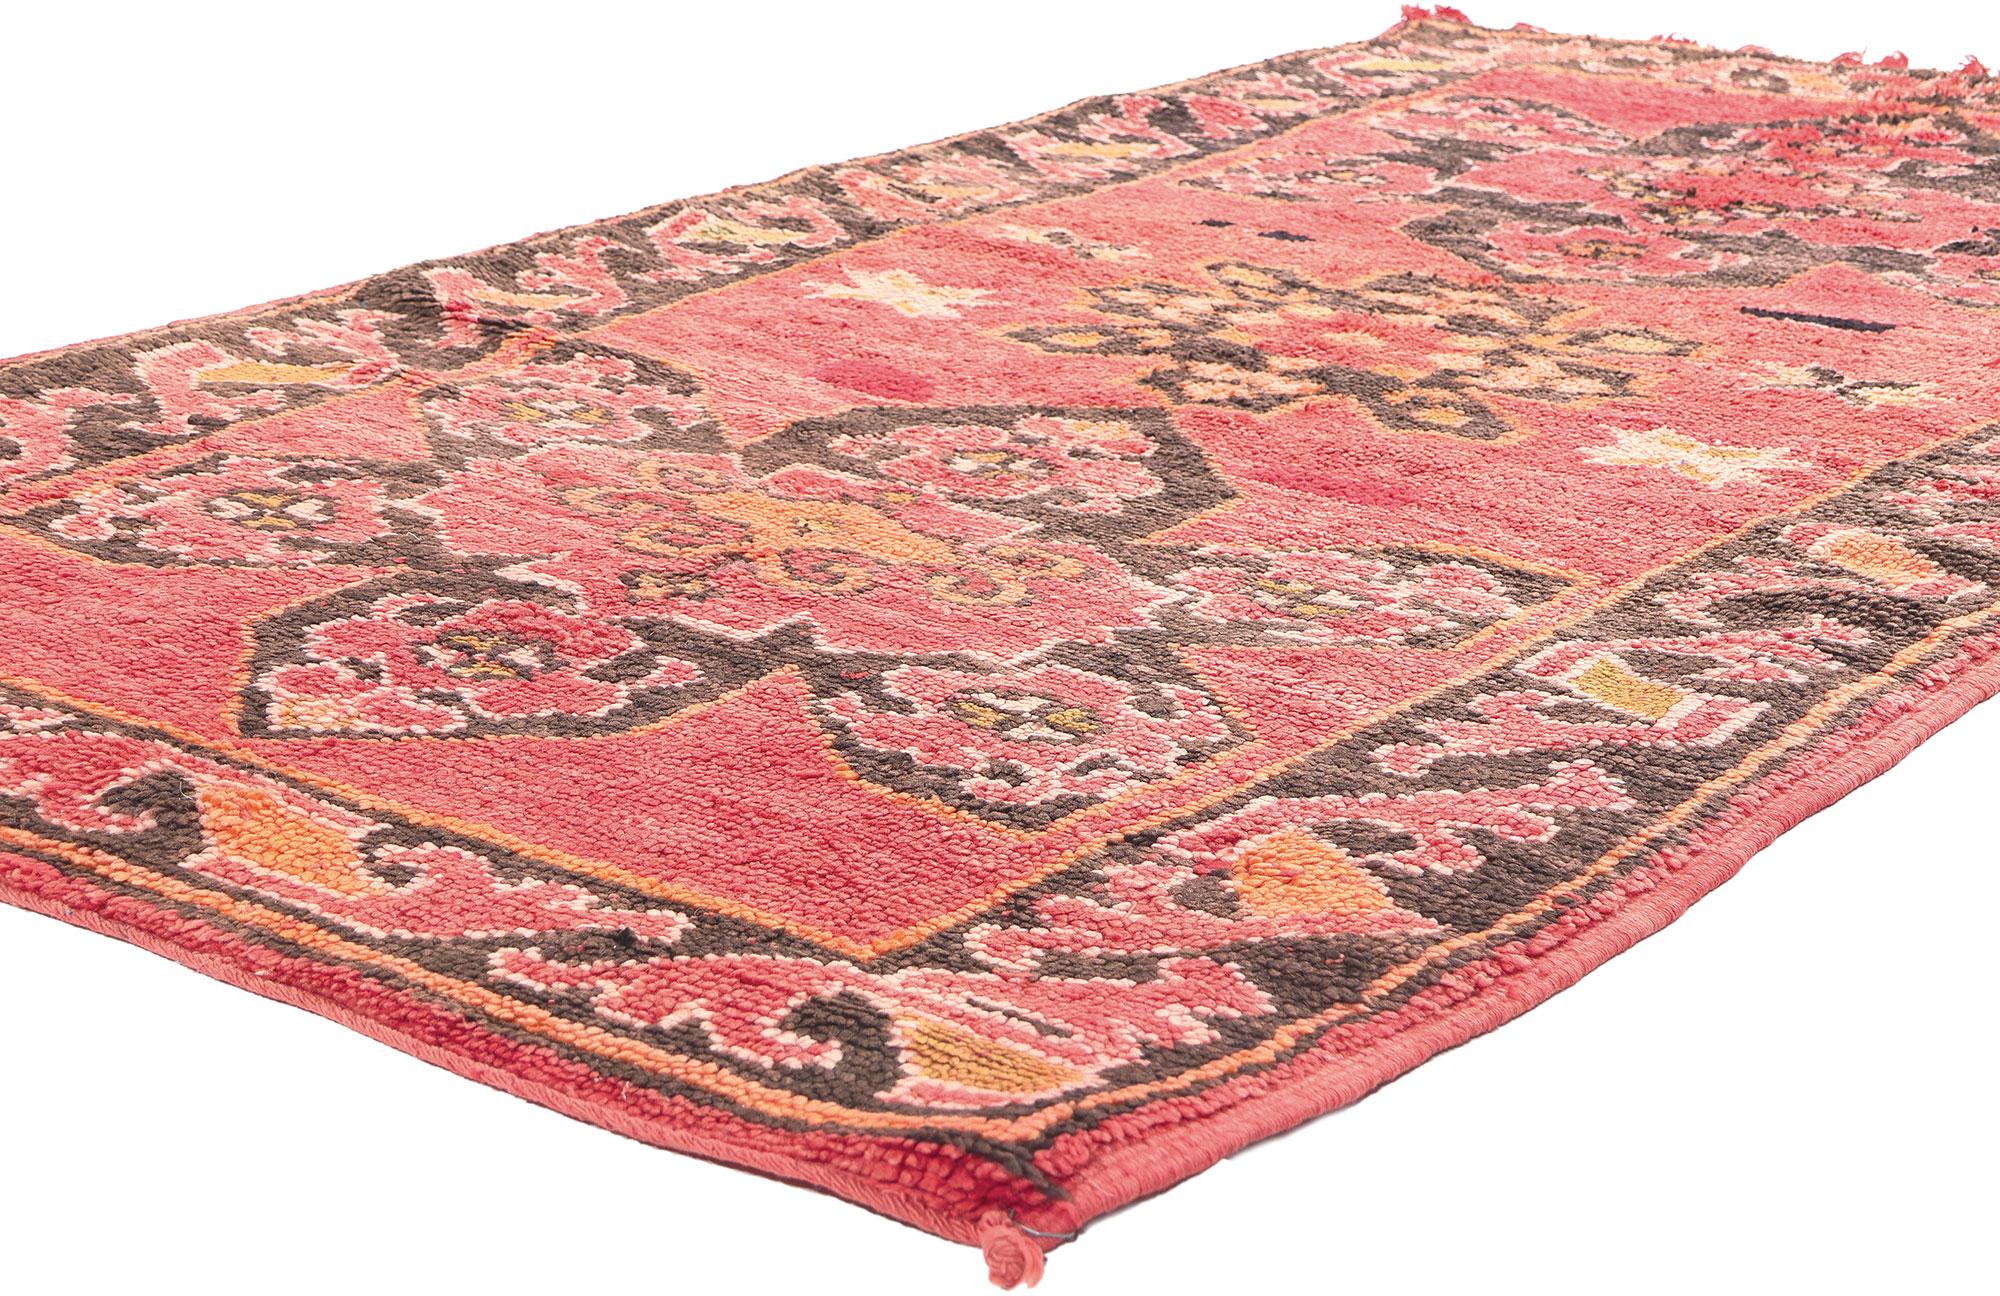 20948 Vintage Red Taznakht Moroccan Rug, 04'01 x 07'06. Embark on an enchanting journey into the rich legacy of the Taznakht Tribe, where skilled hands in the High Atlas Mountains of southern Morocco meticulously wove this hand-knotted wool vintage